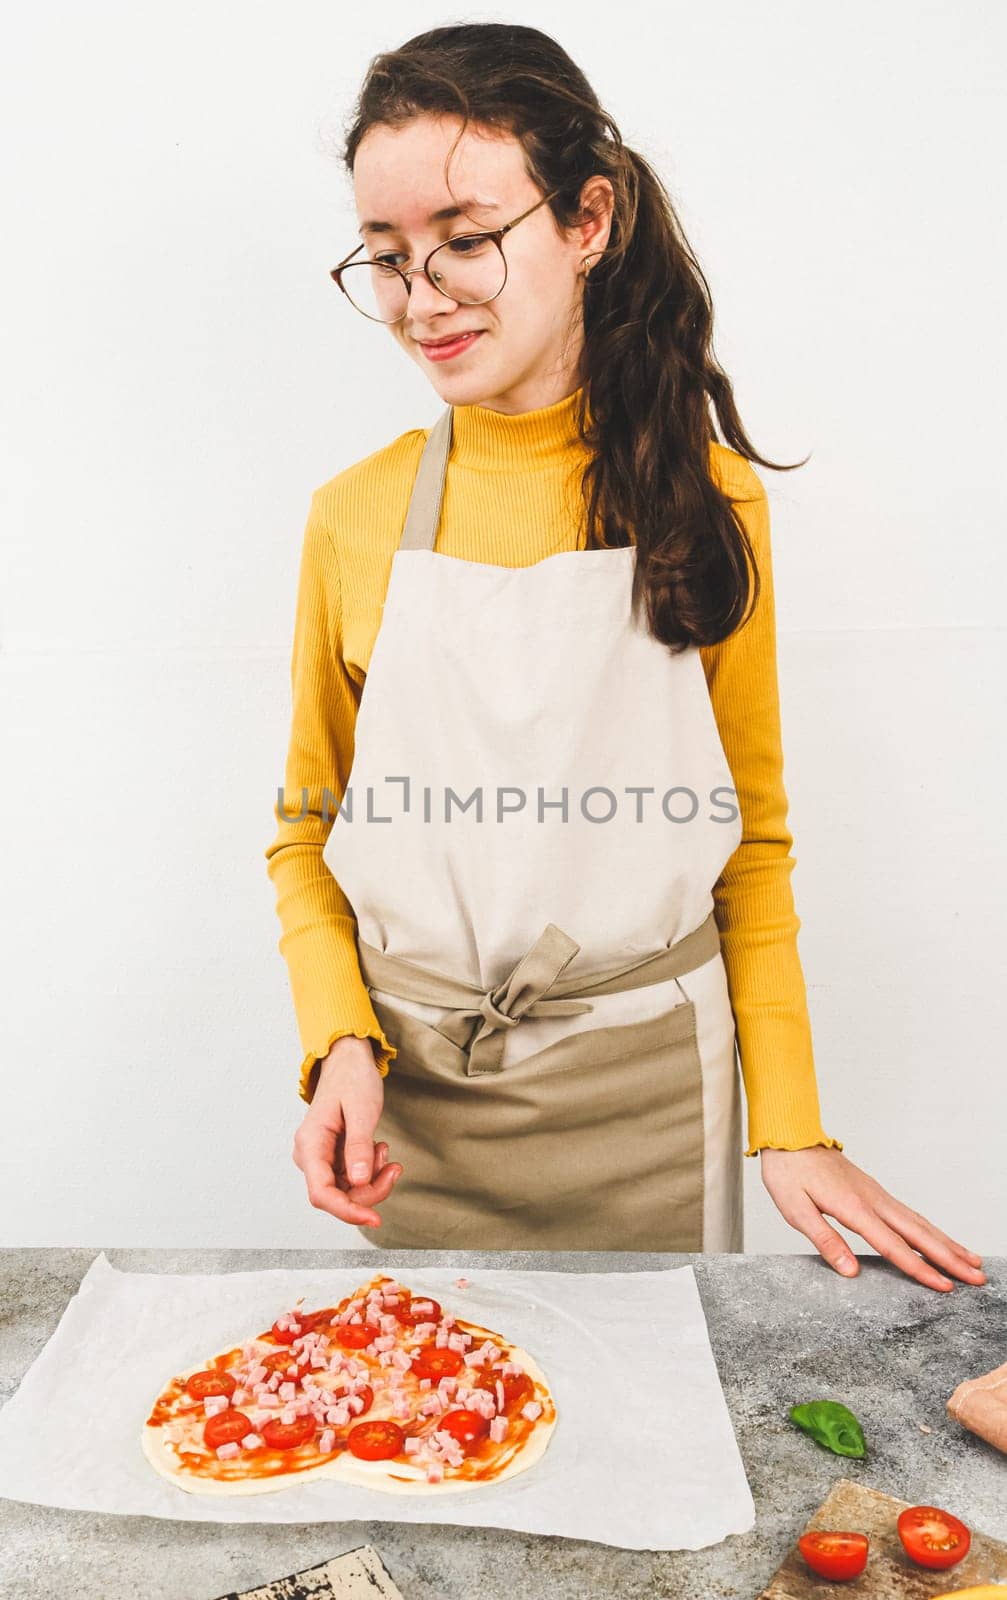 Caucasian teenage girl in an apron with a happy look looks to the side while standing at the table with raw pizza in the shape of a heart on parchment, side view close-up. Concept of cooking pizza.